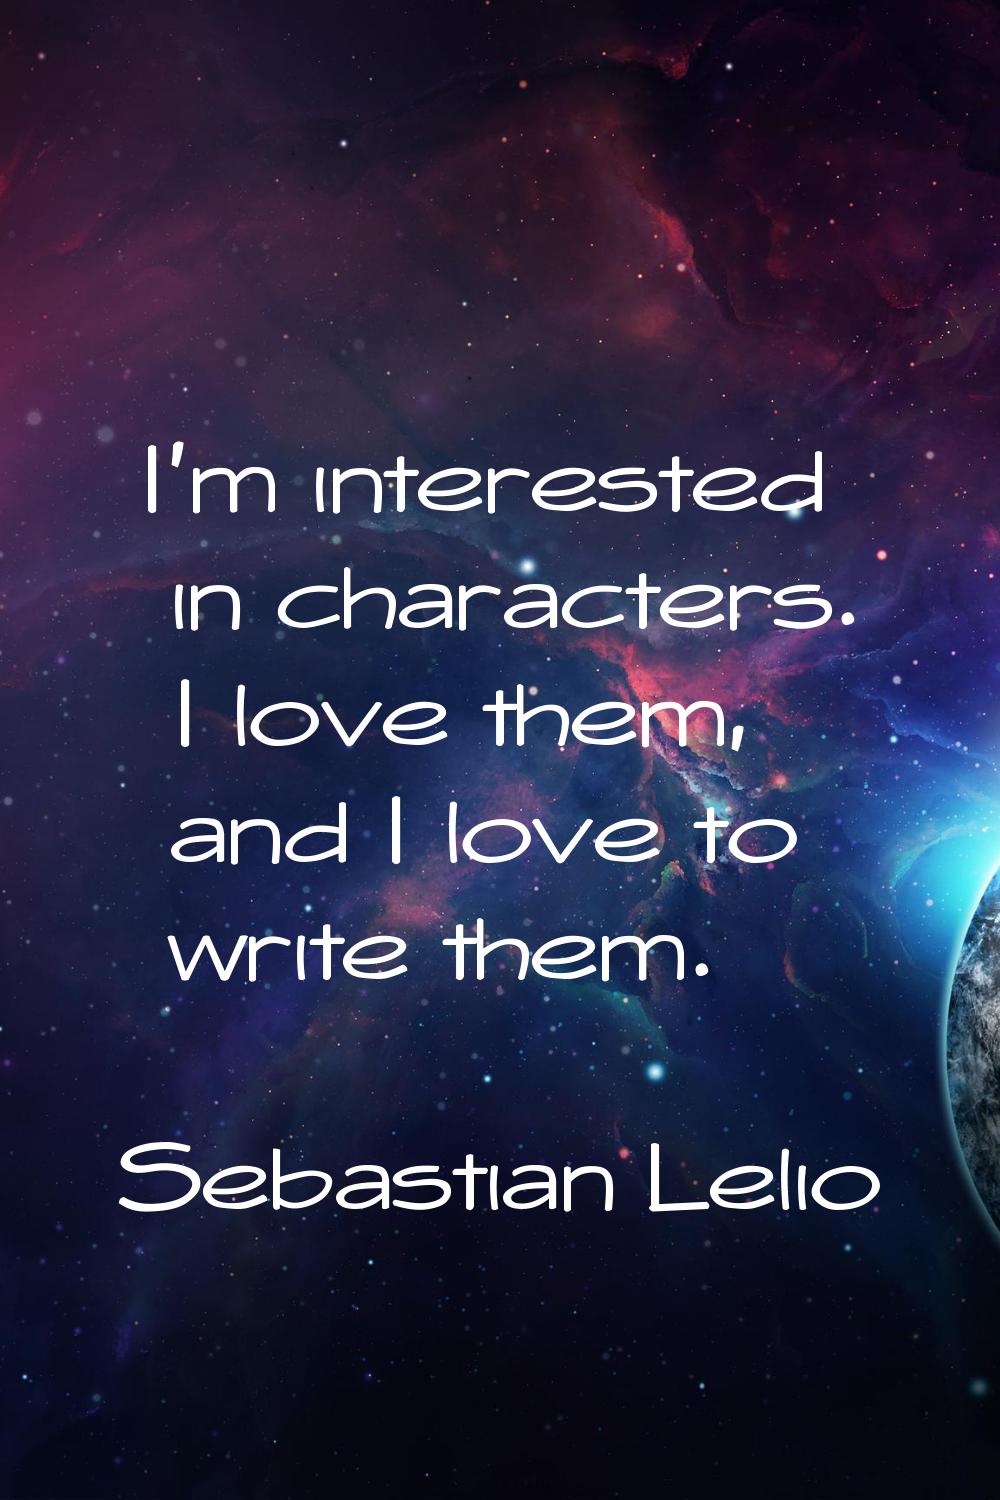 I'm interested in characters. I love them, and I love to write them.